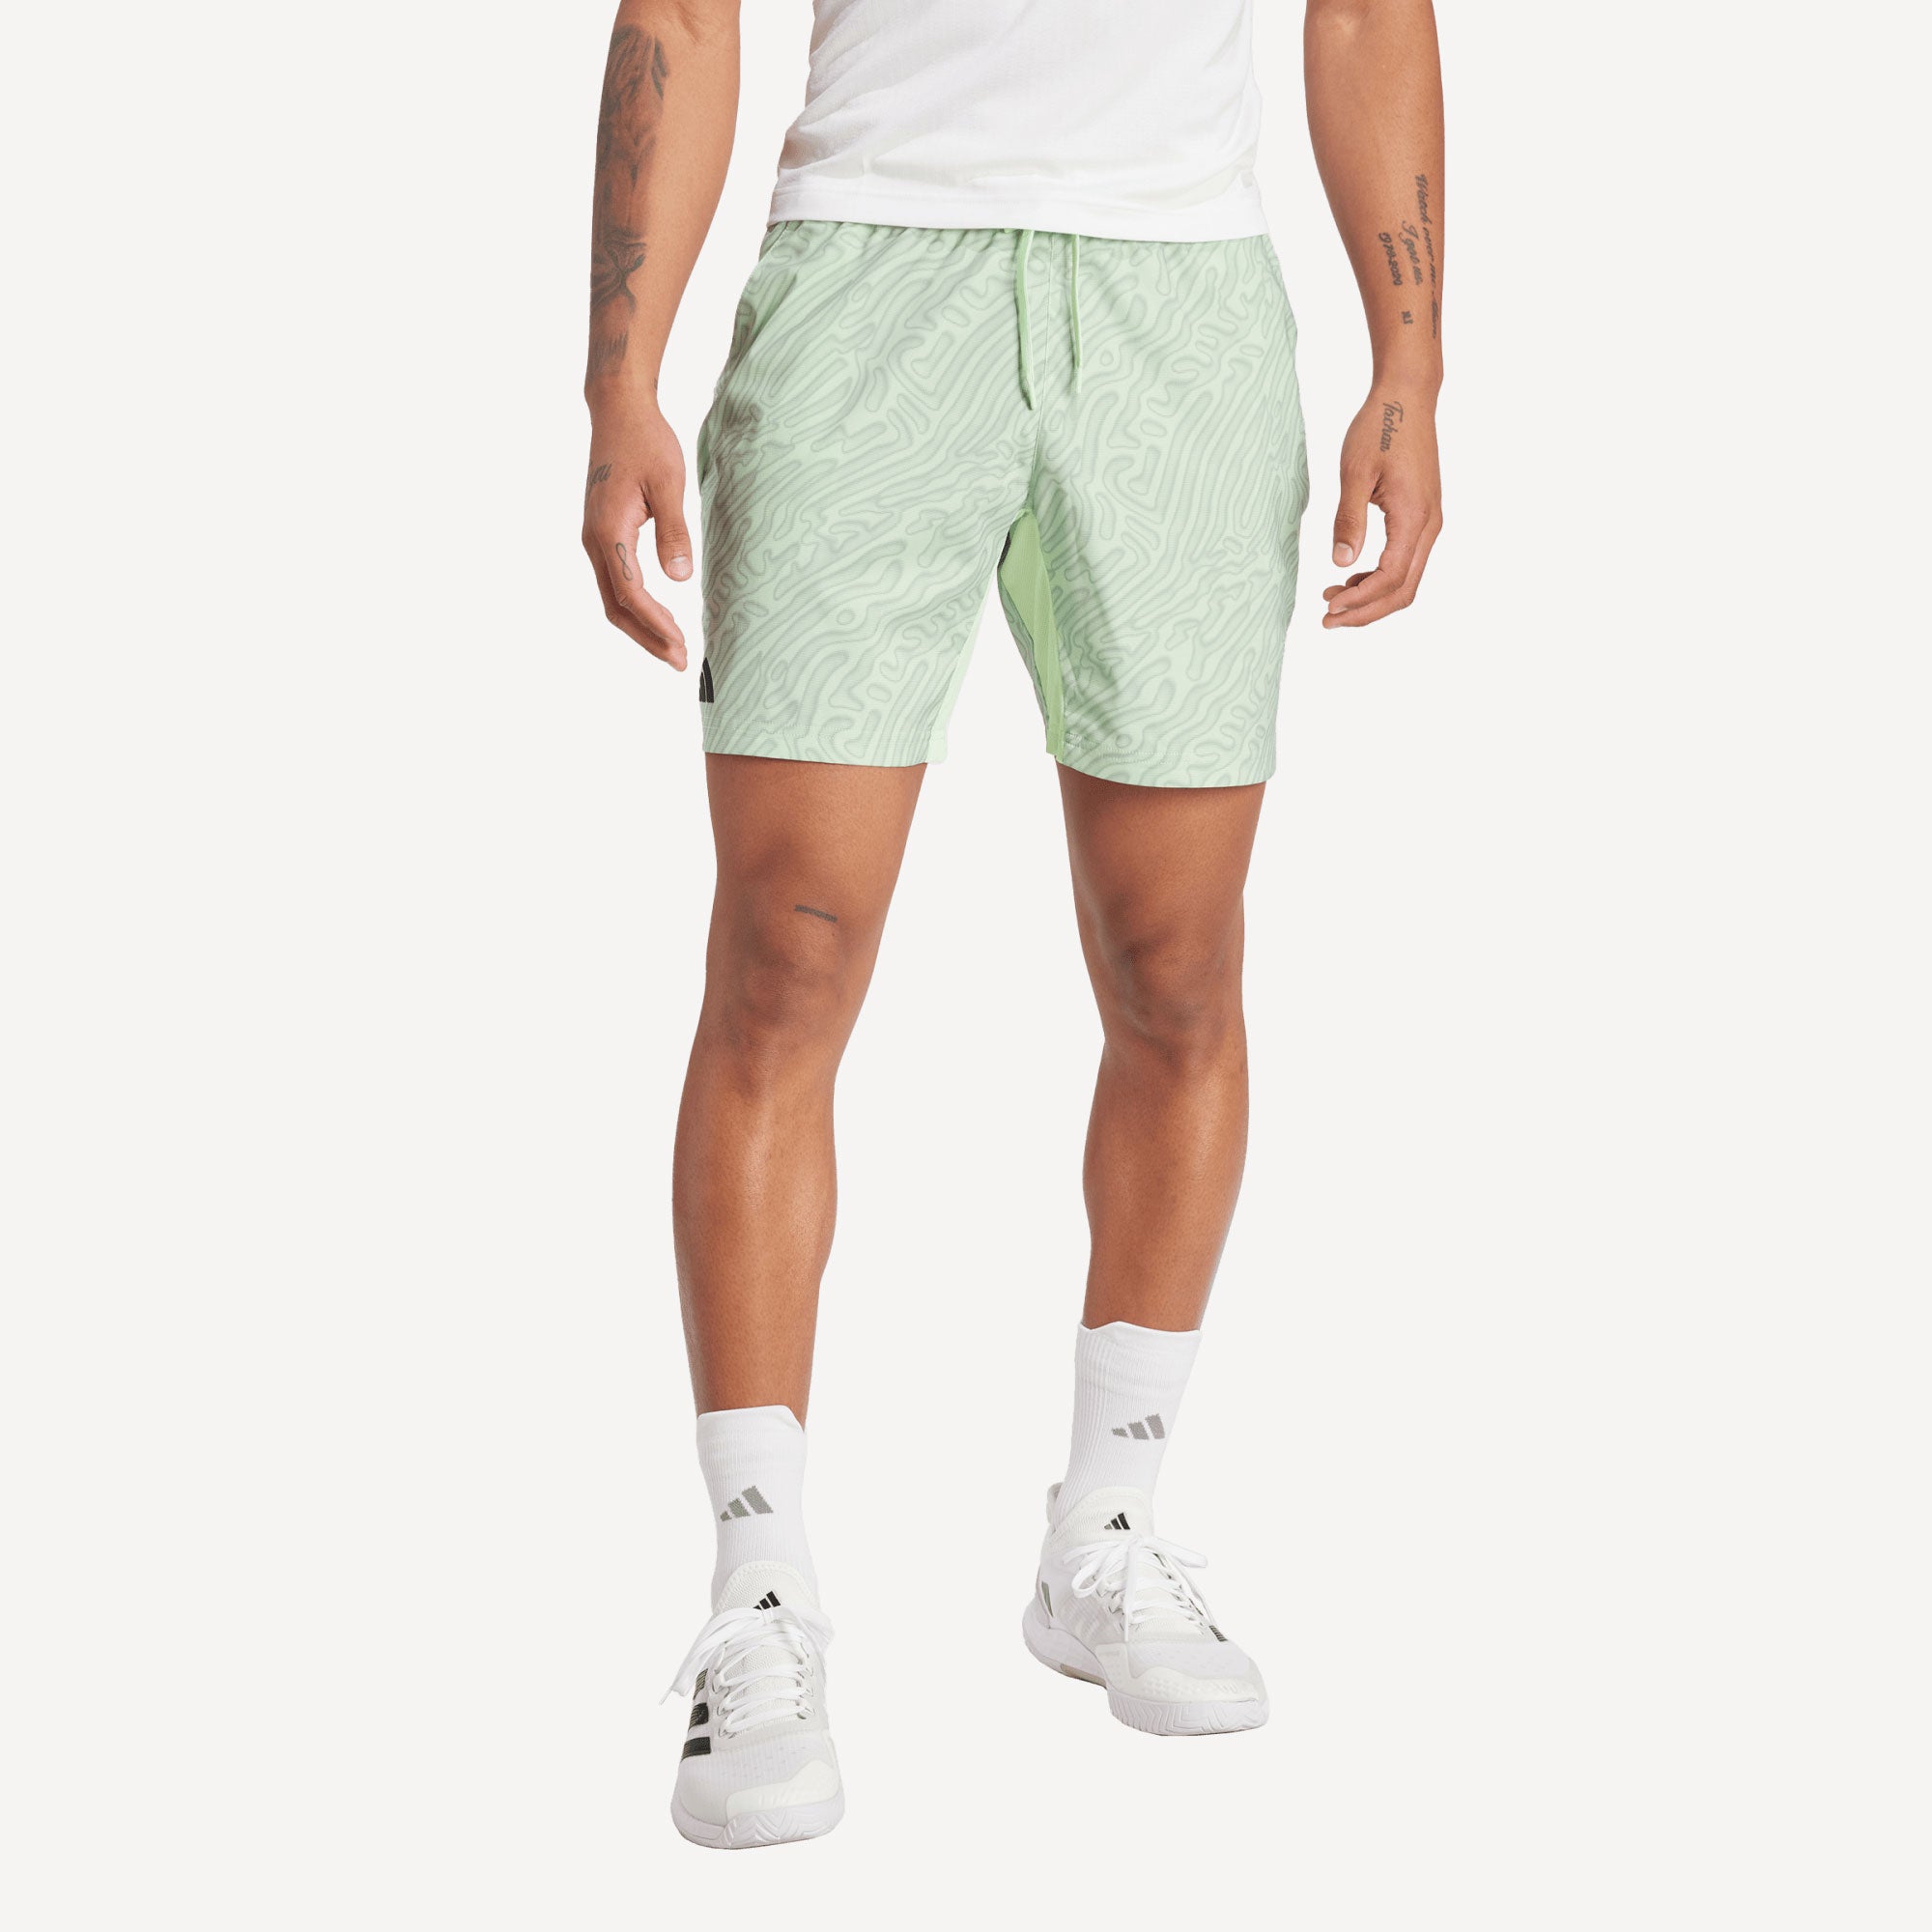 adidas Pro Melbourne Men's Printed 7-Inch Tennis Shorts - Green (1)